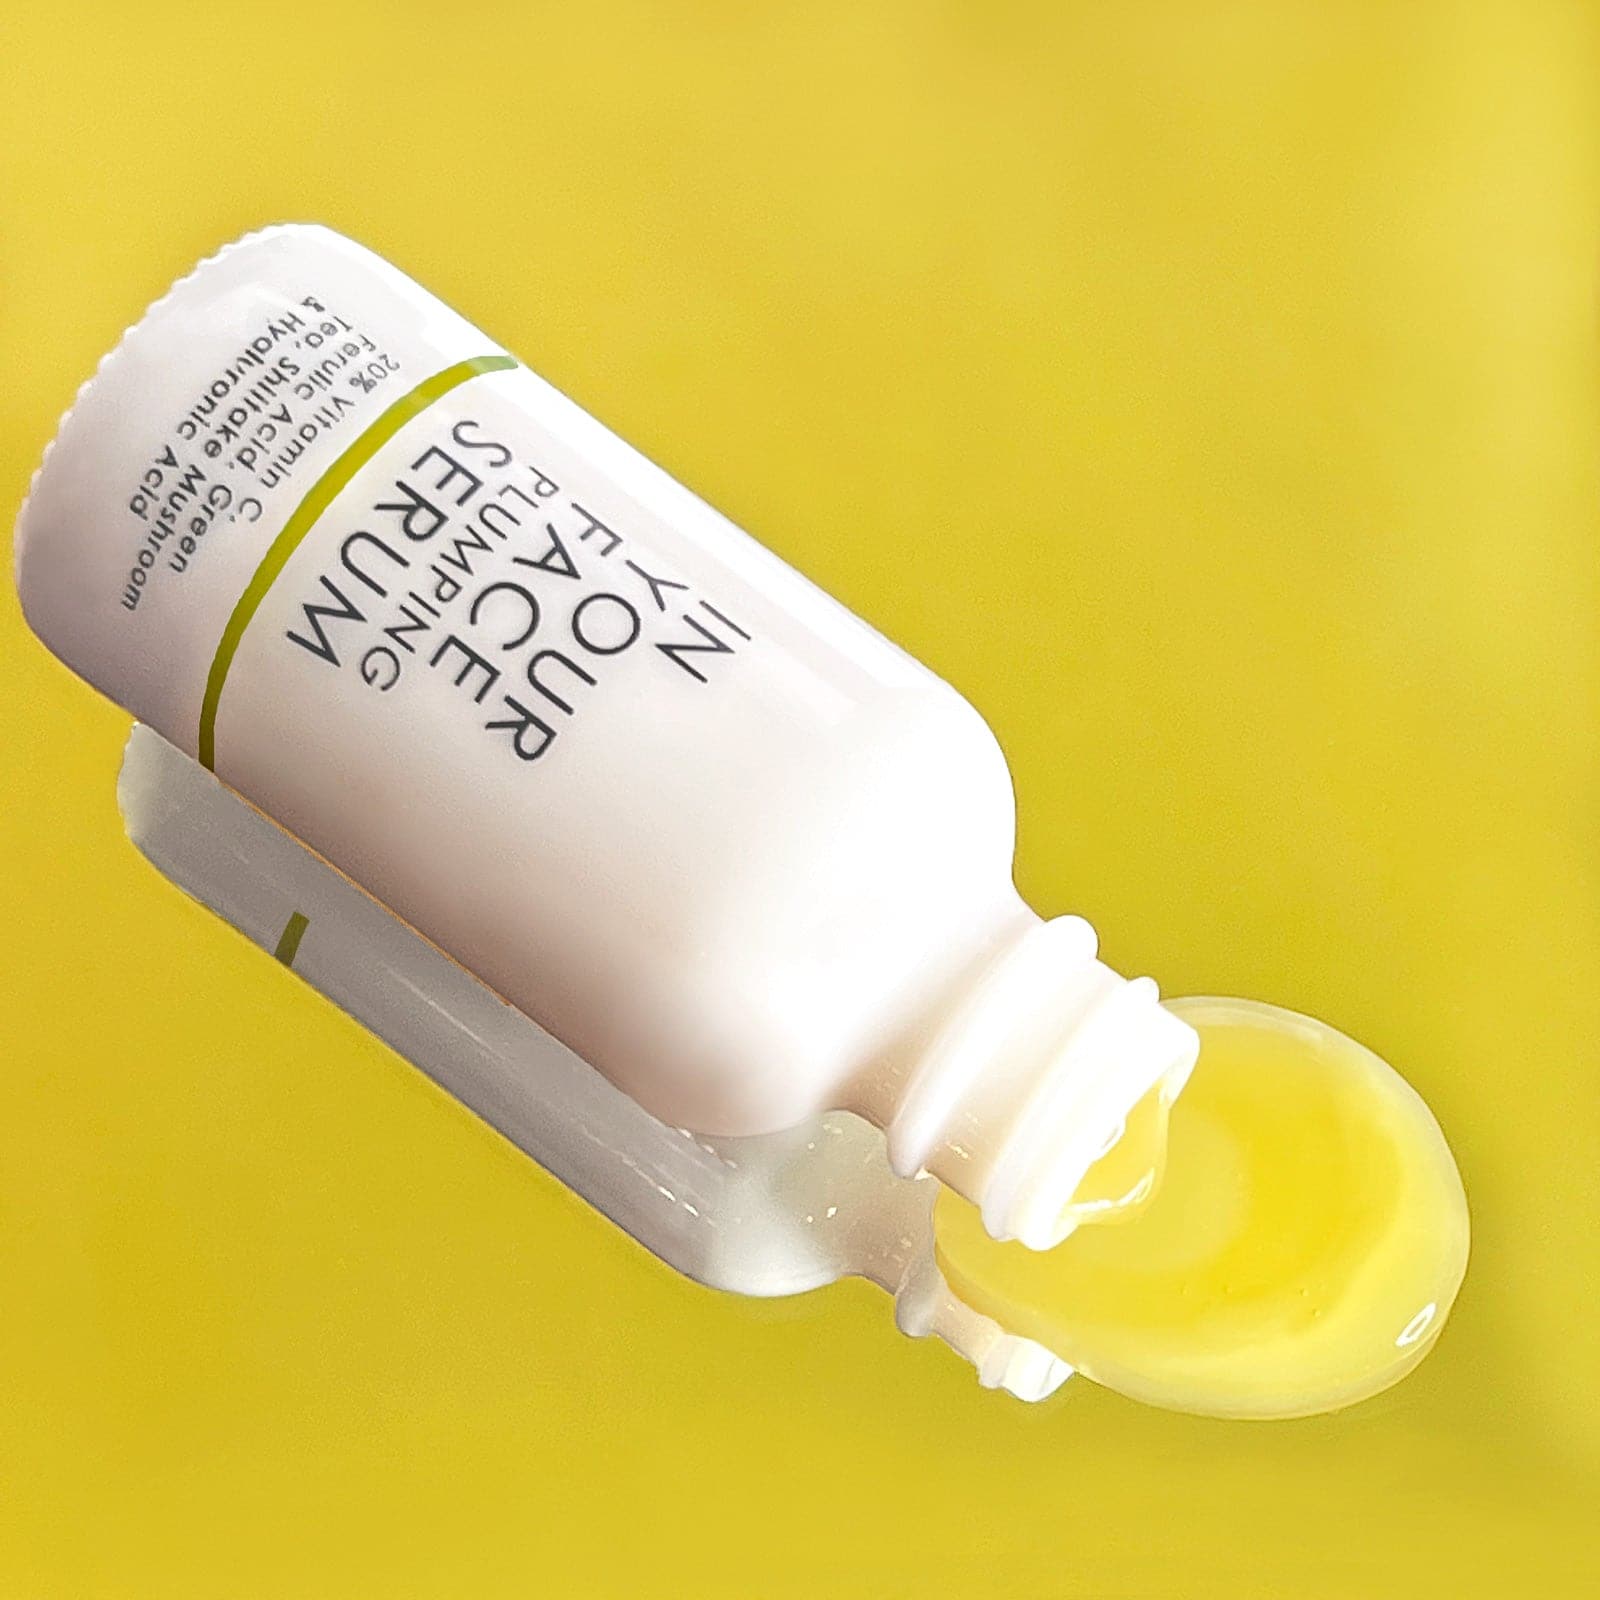 our VITAMIN C PLUMPING SERUM on a bright yellow background. The bottle is tipped over and some of the serum is coming out, a pale yellow color.